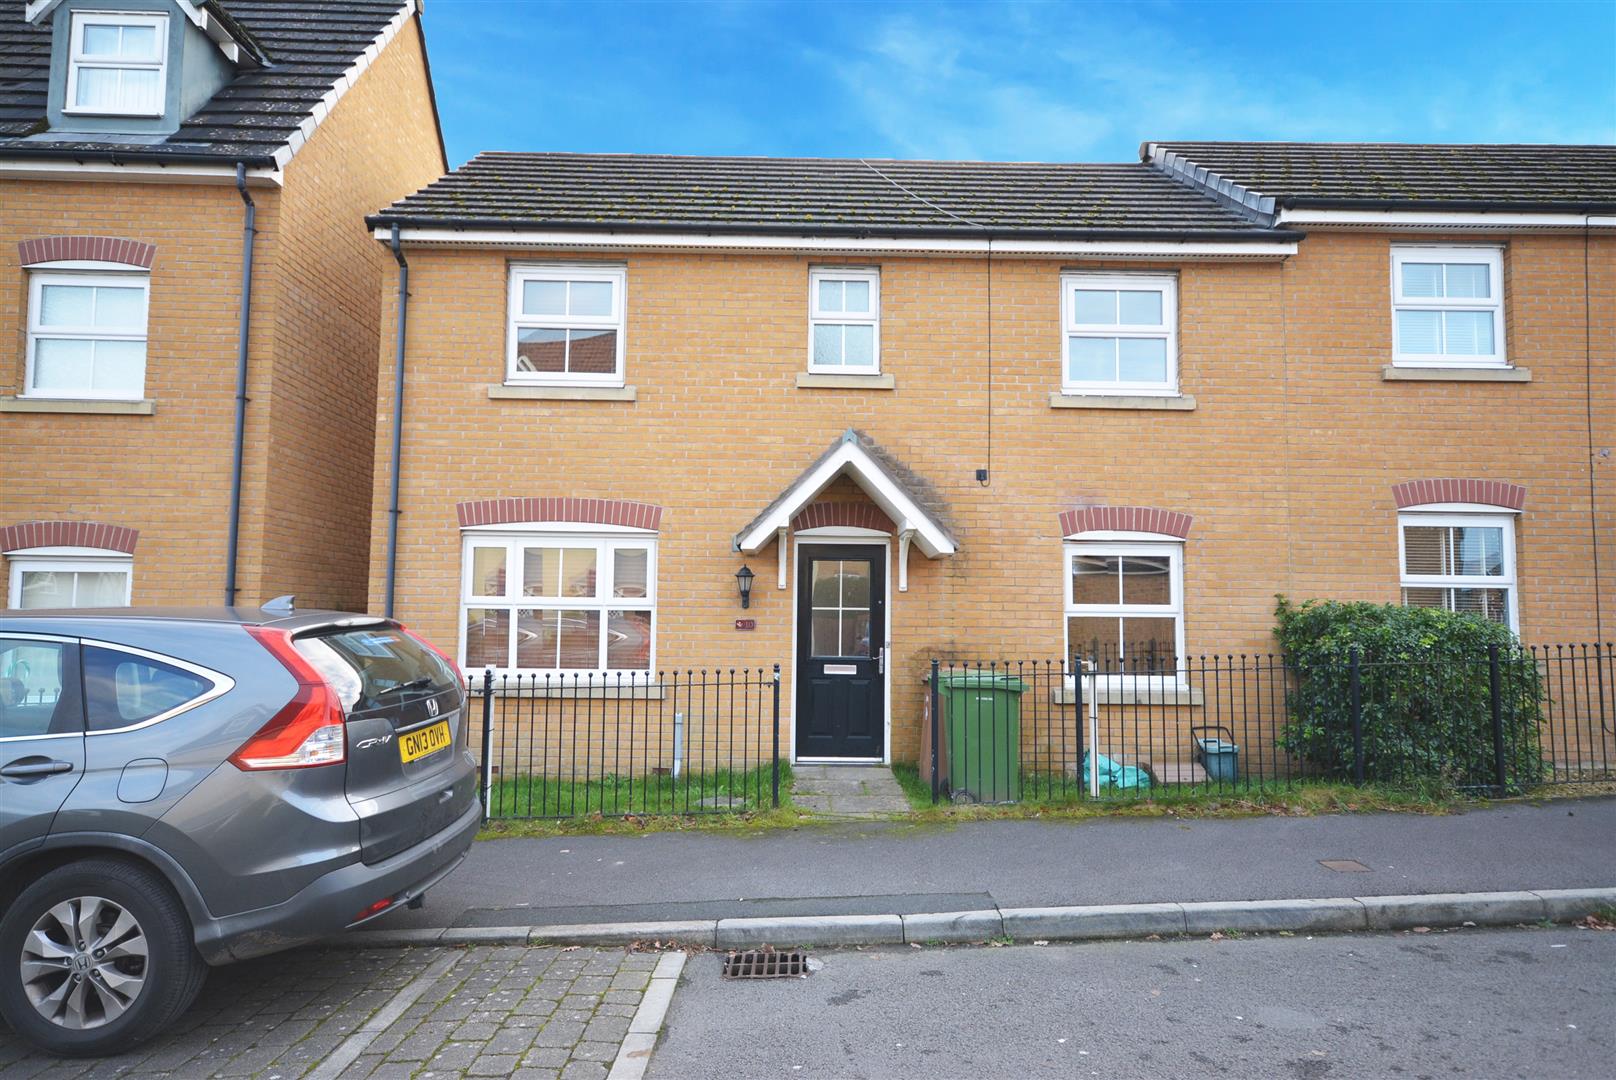 3 bed semi-detached house for sale in Red Kite Close, Hengoed - Property Image 1